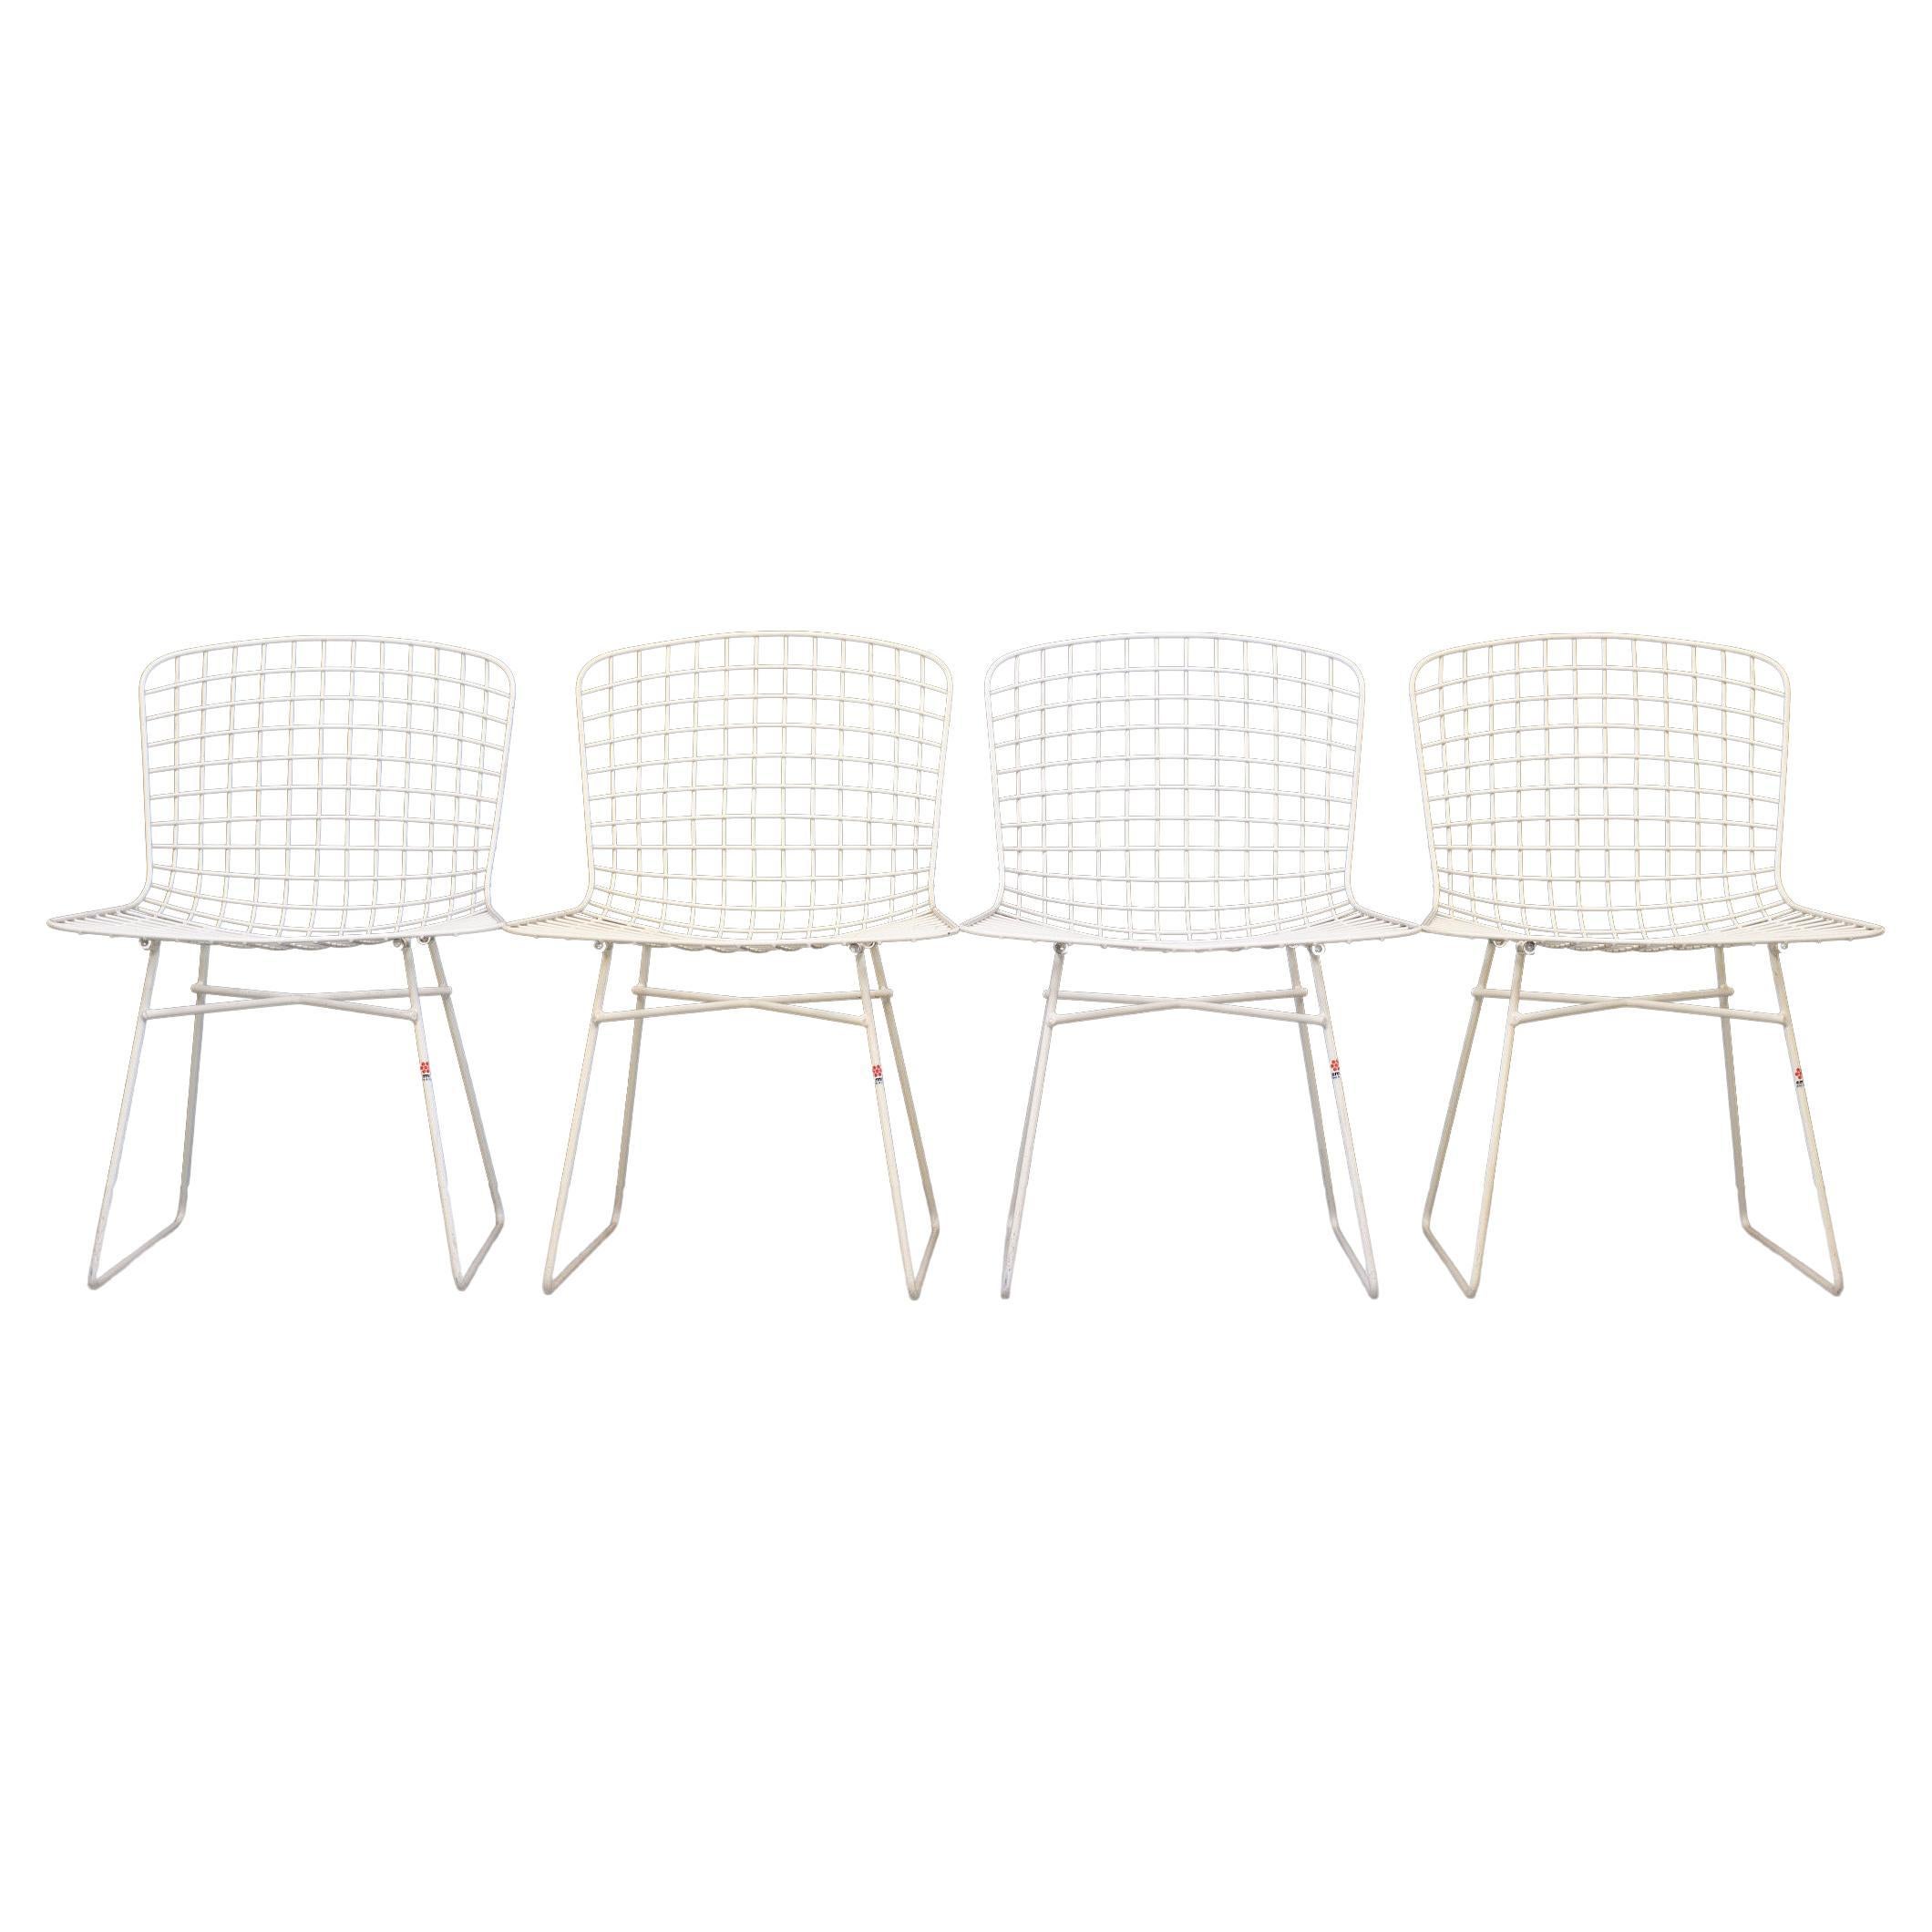 Ebu Wire Dining Chairs Harry Bertoia Style, Italy, 1970s For Sale